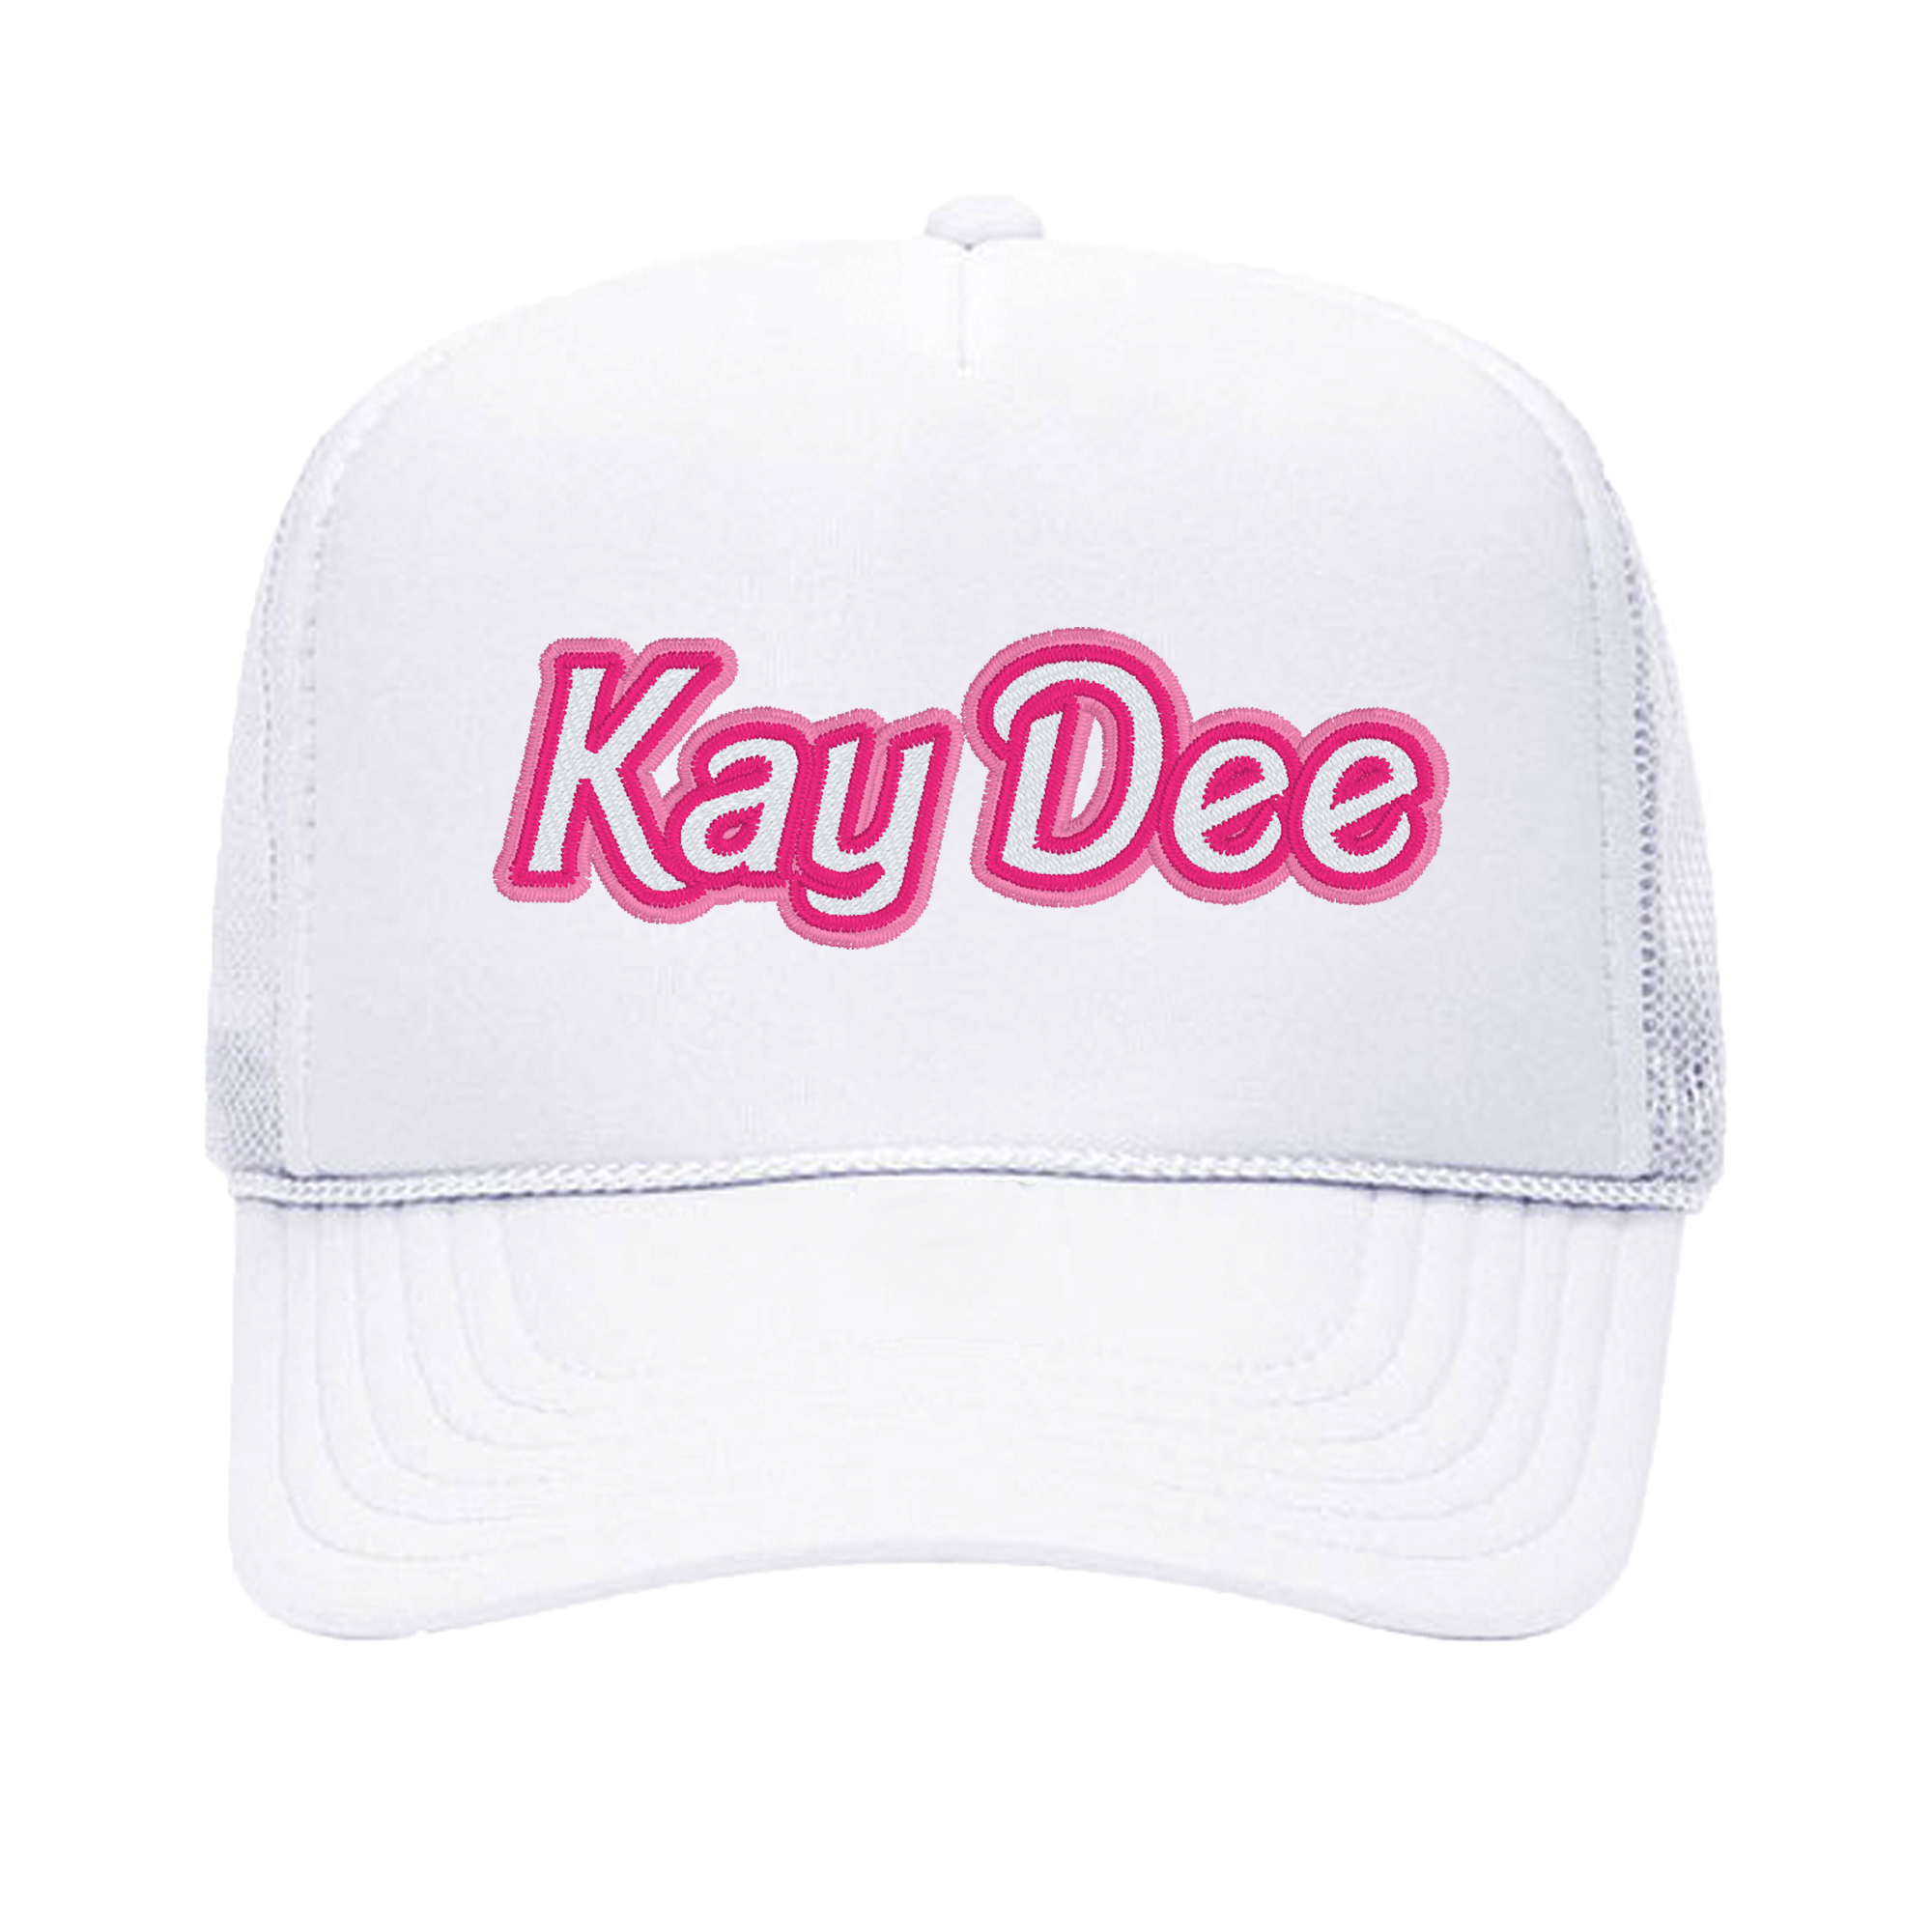 a white trucker hat with the word kay dee on it